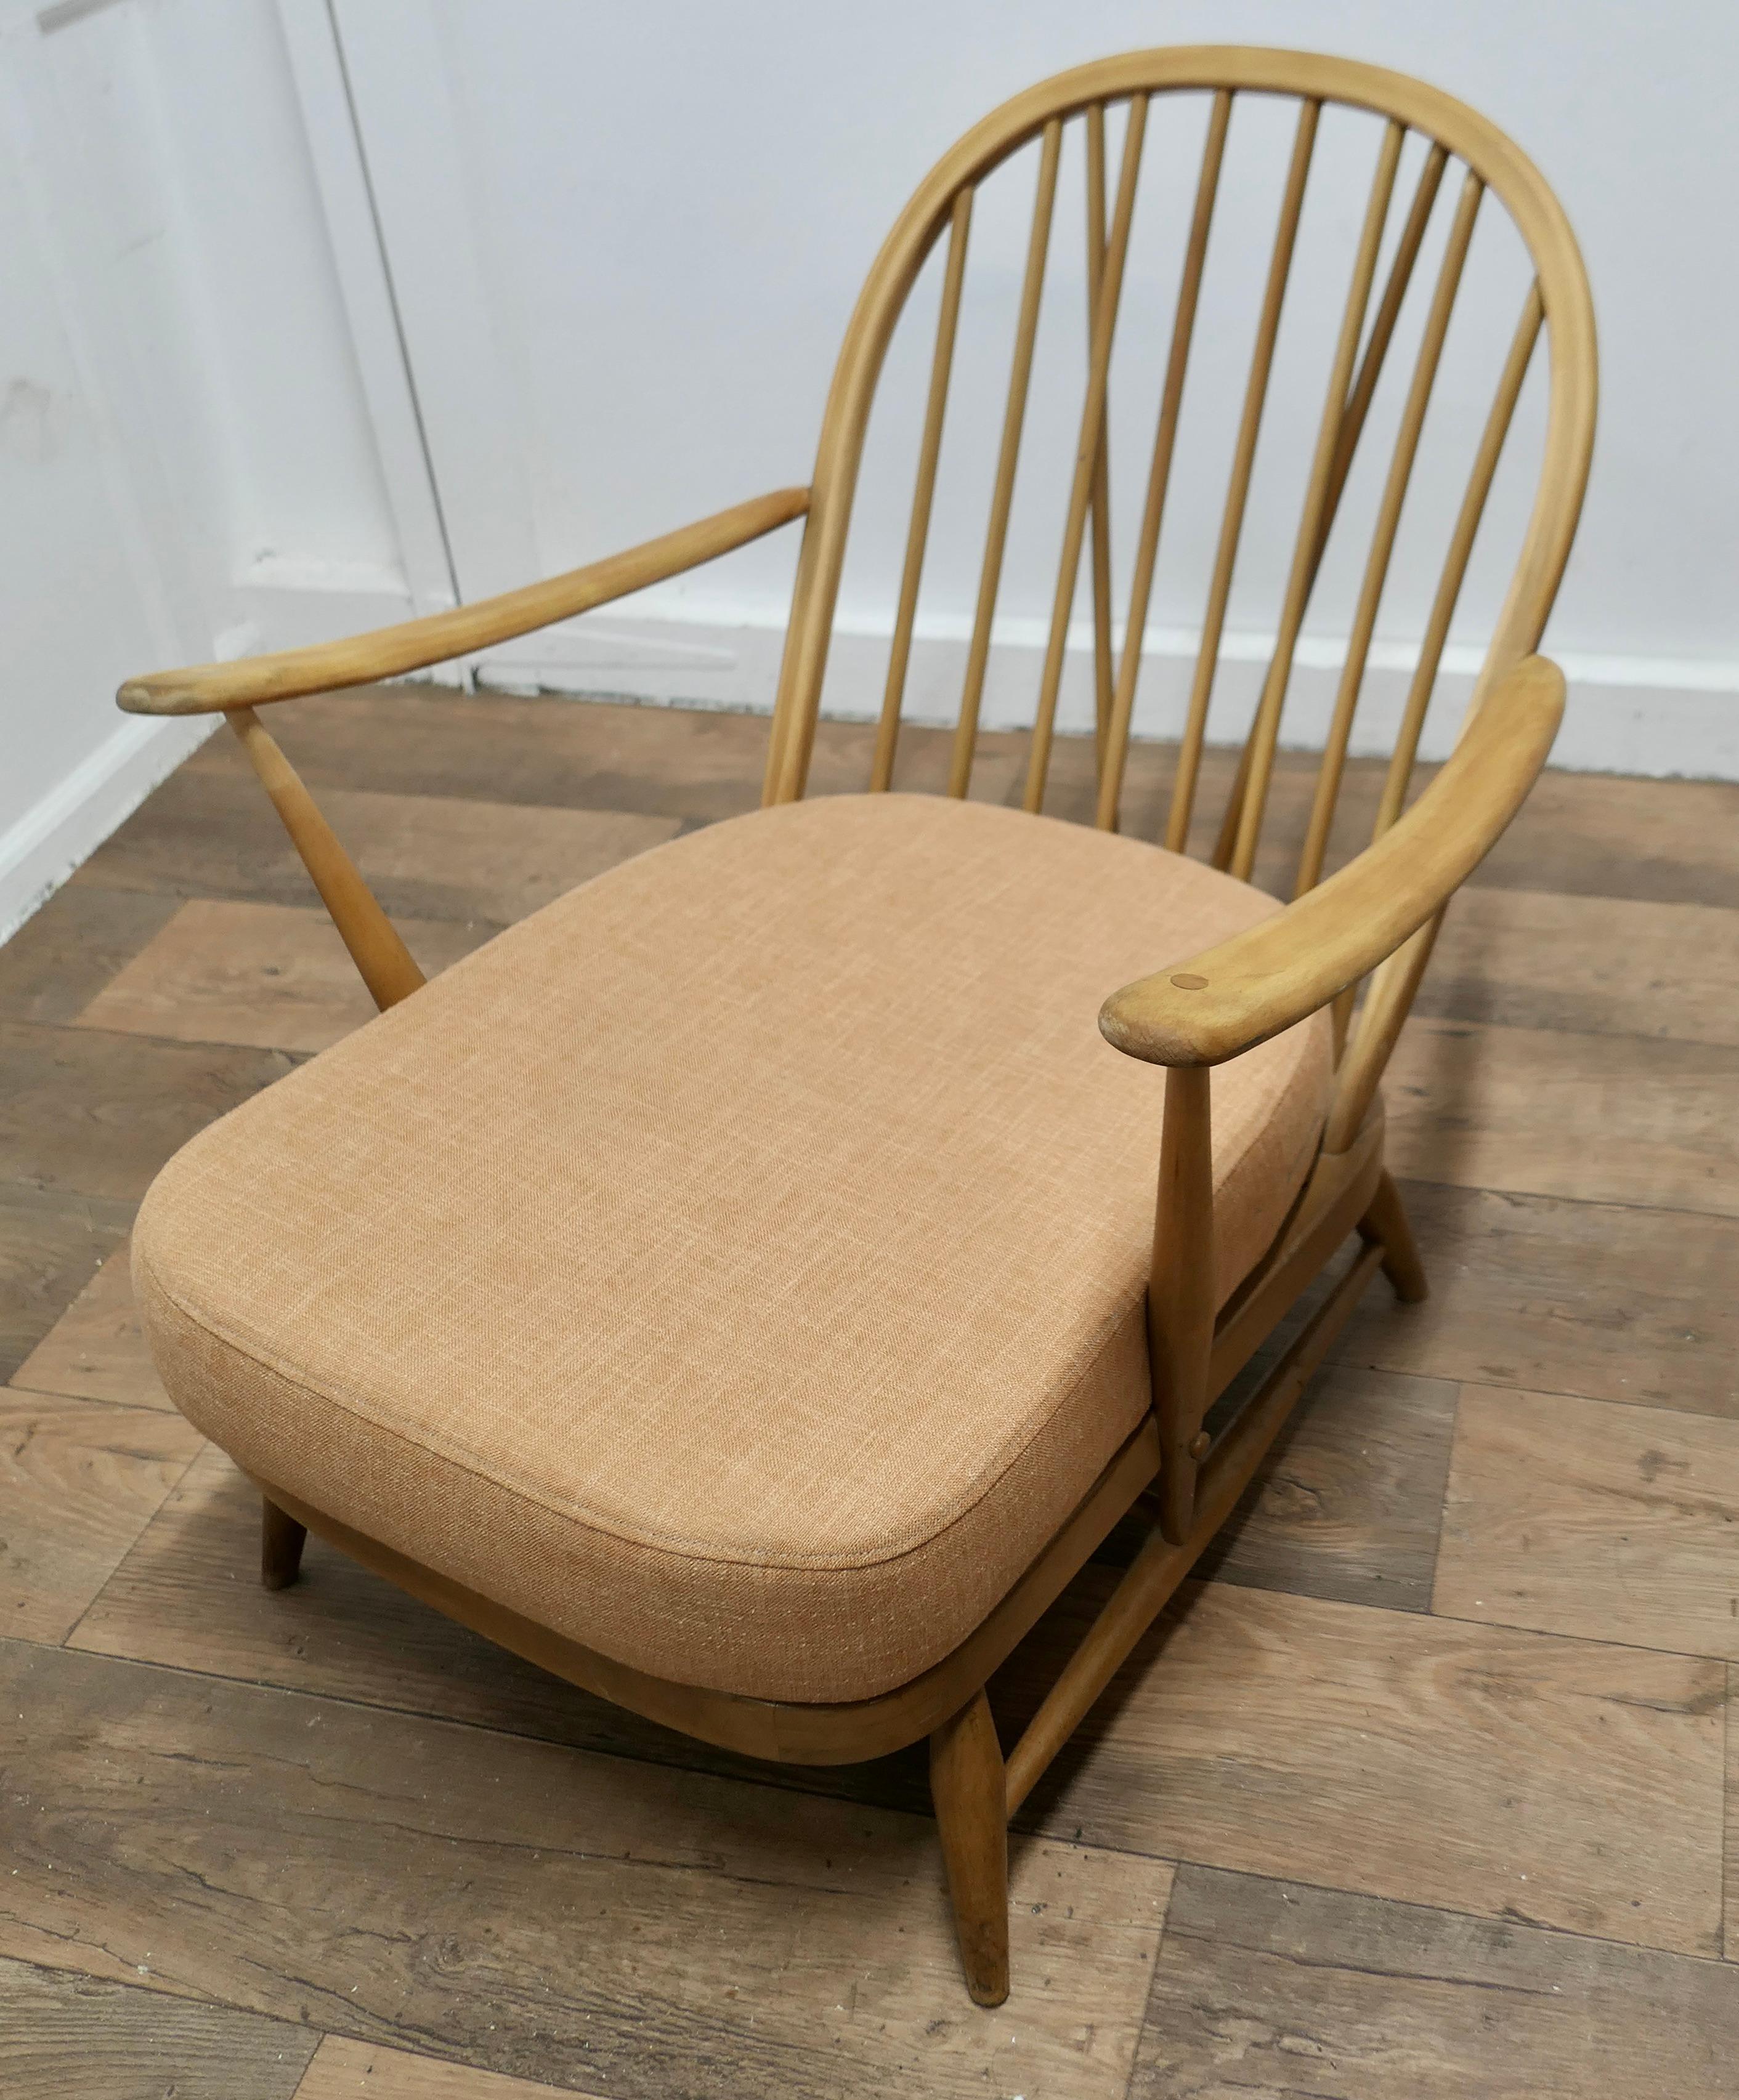 Ercol Windsor Easy Chair   The chair is a classic design and traditionally made  In Good Condition For Sale In Chillerton, Isle of Wight